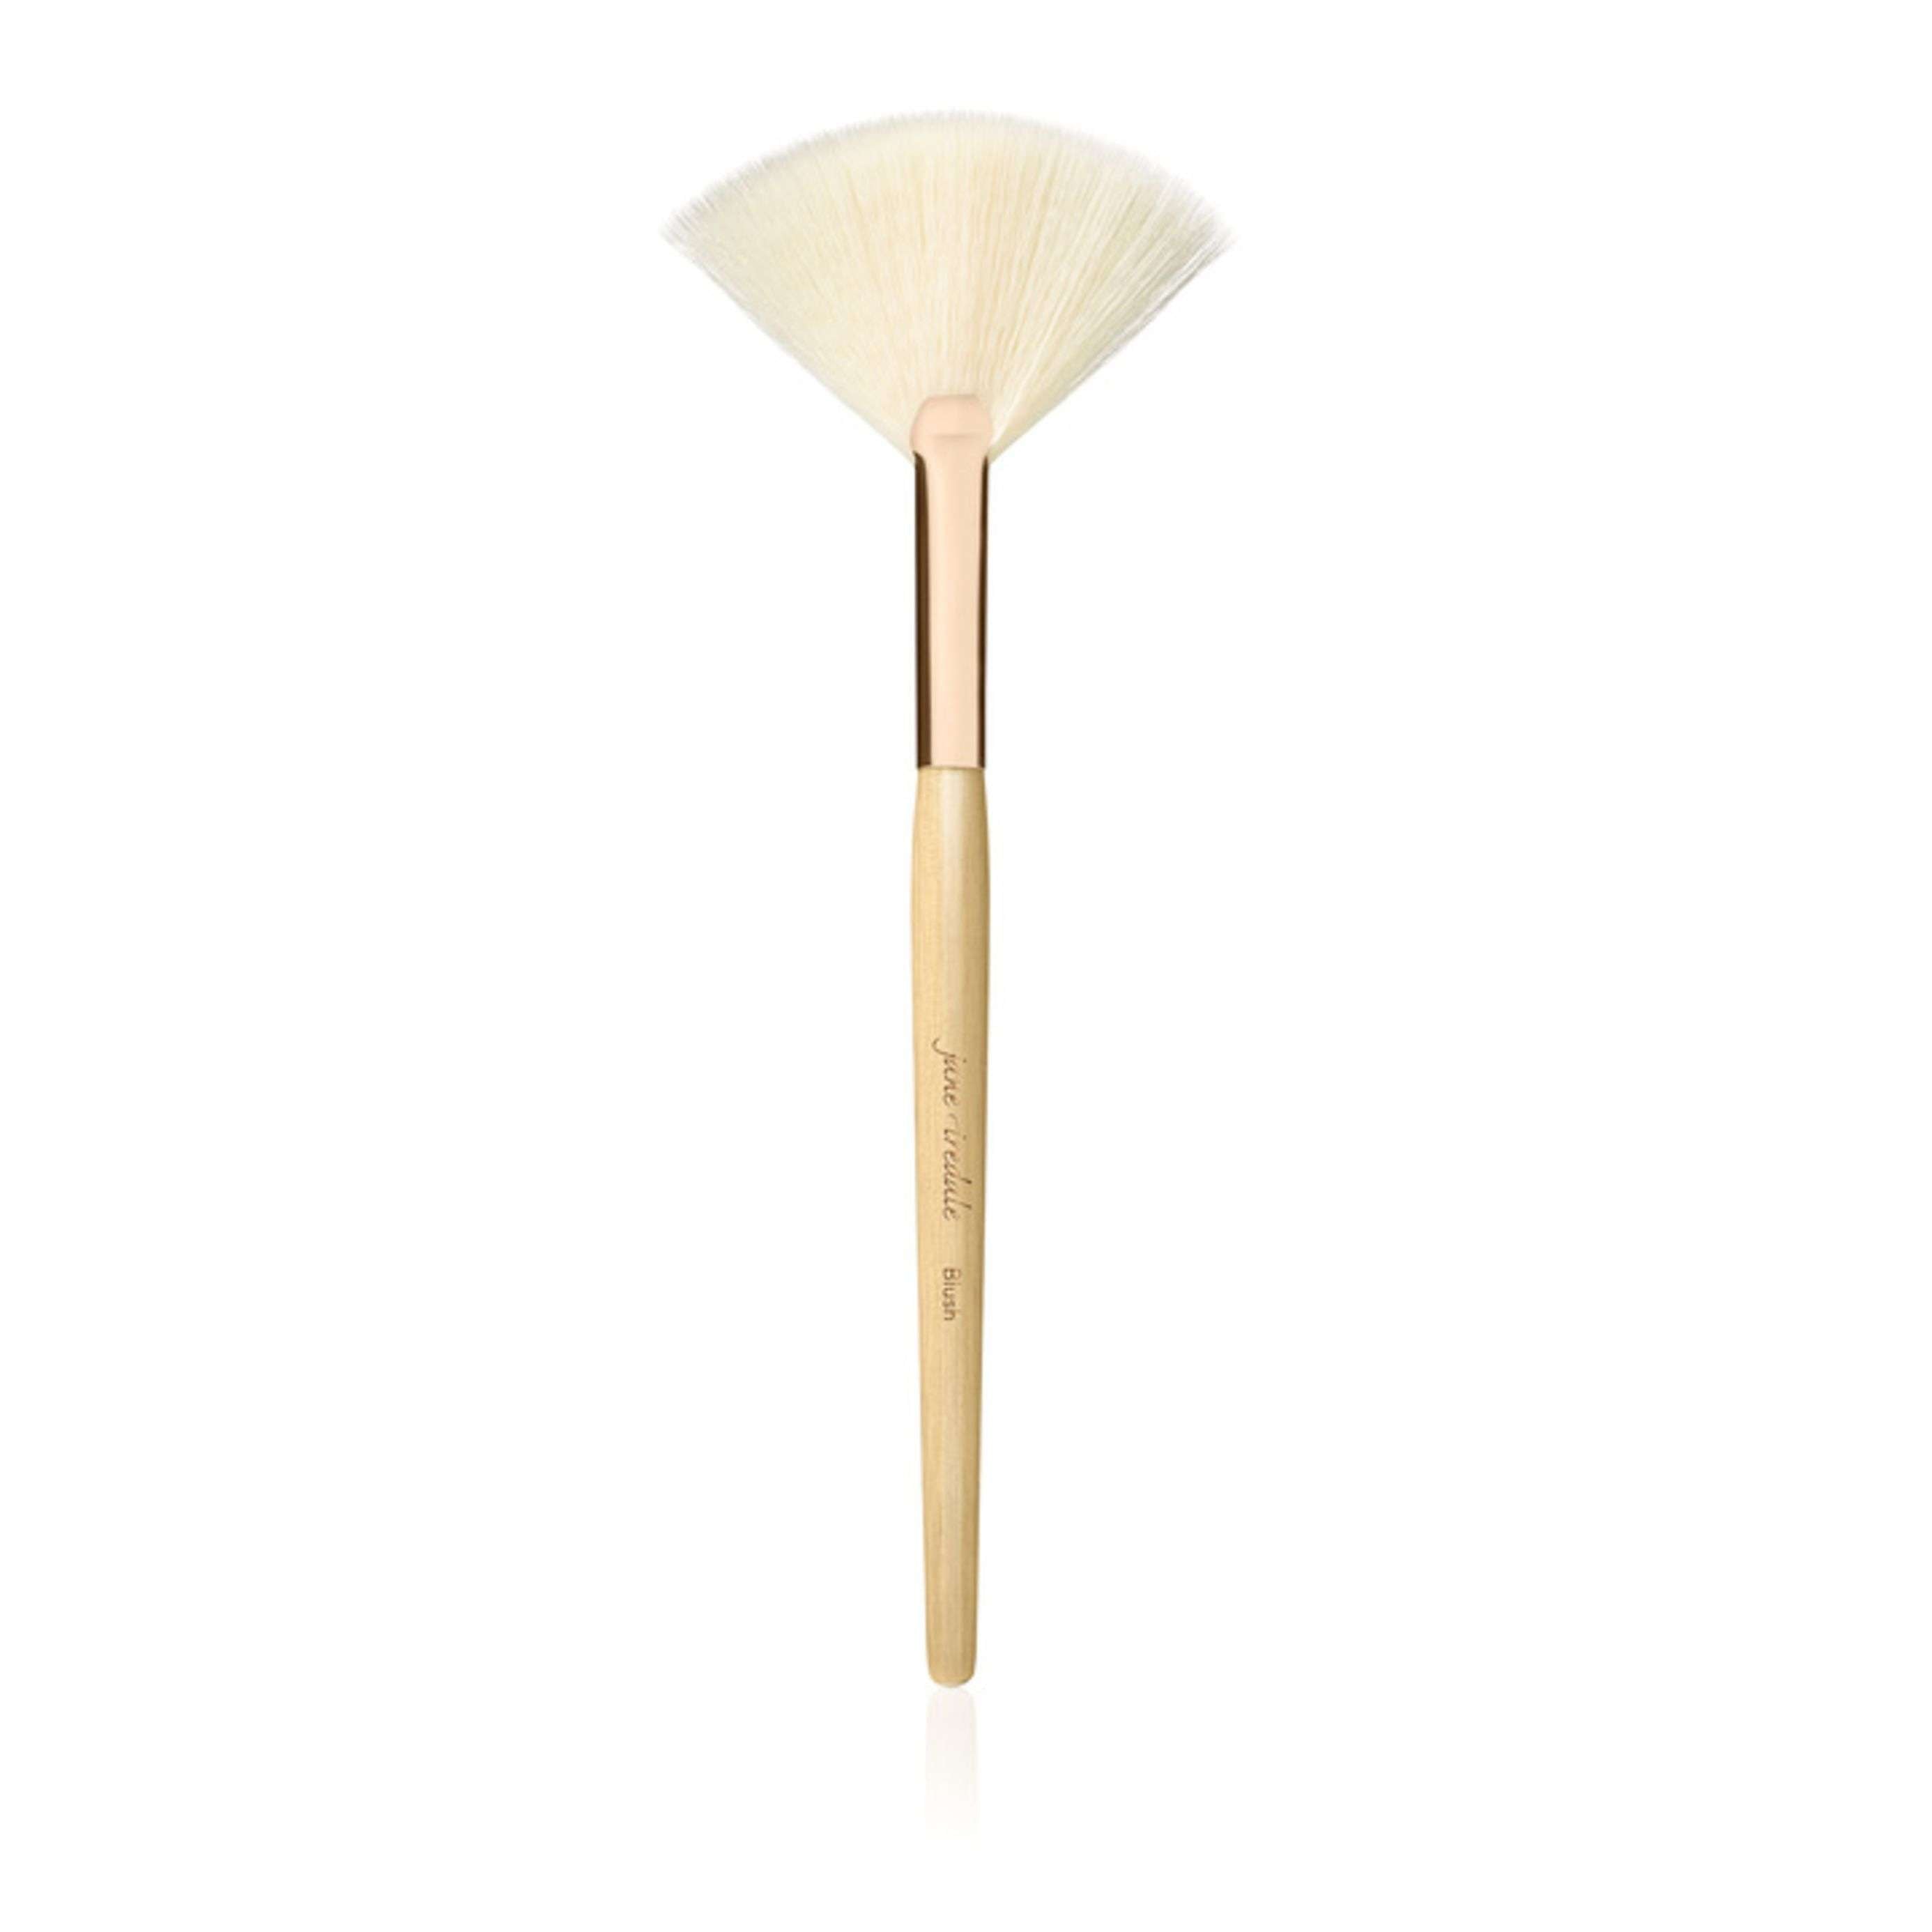 Jane Iredale White Fan Brush for Blush, Highlighter, Powders at Socialite Beauty Canada